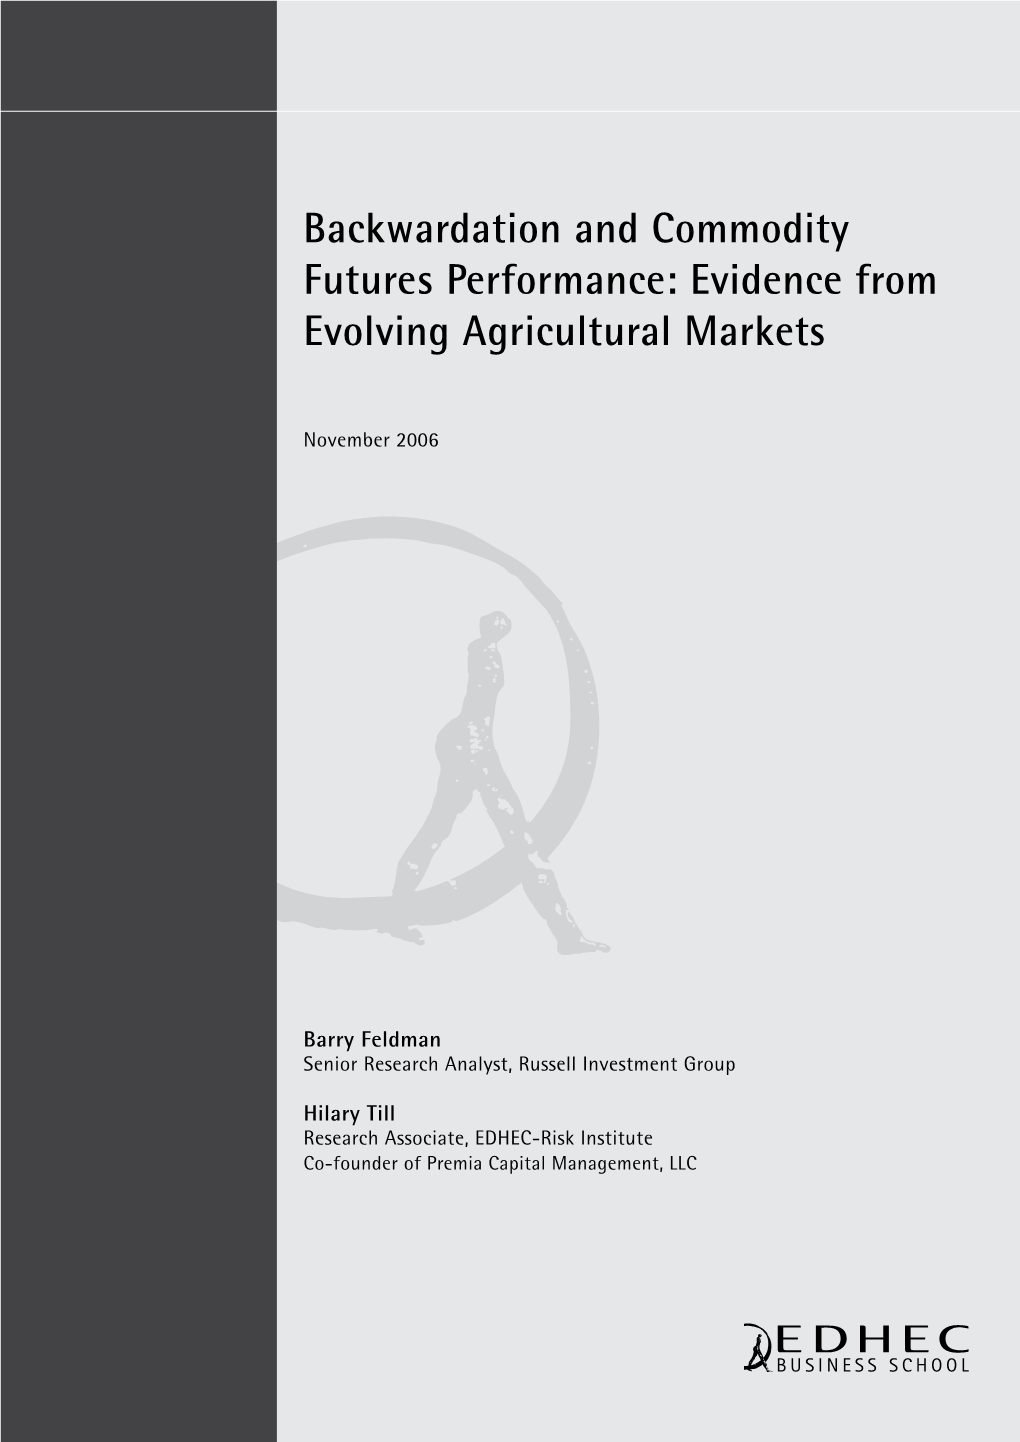 Backwardation and Commodity Futures Performance: Evidence from Evolving Agricultural Markets